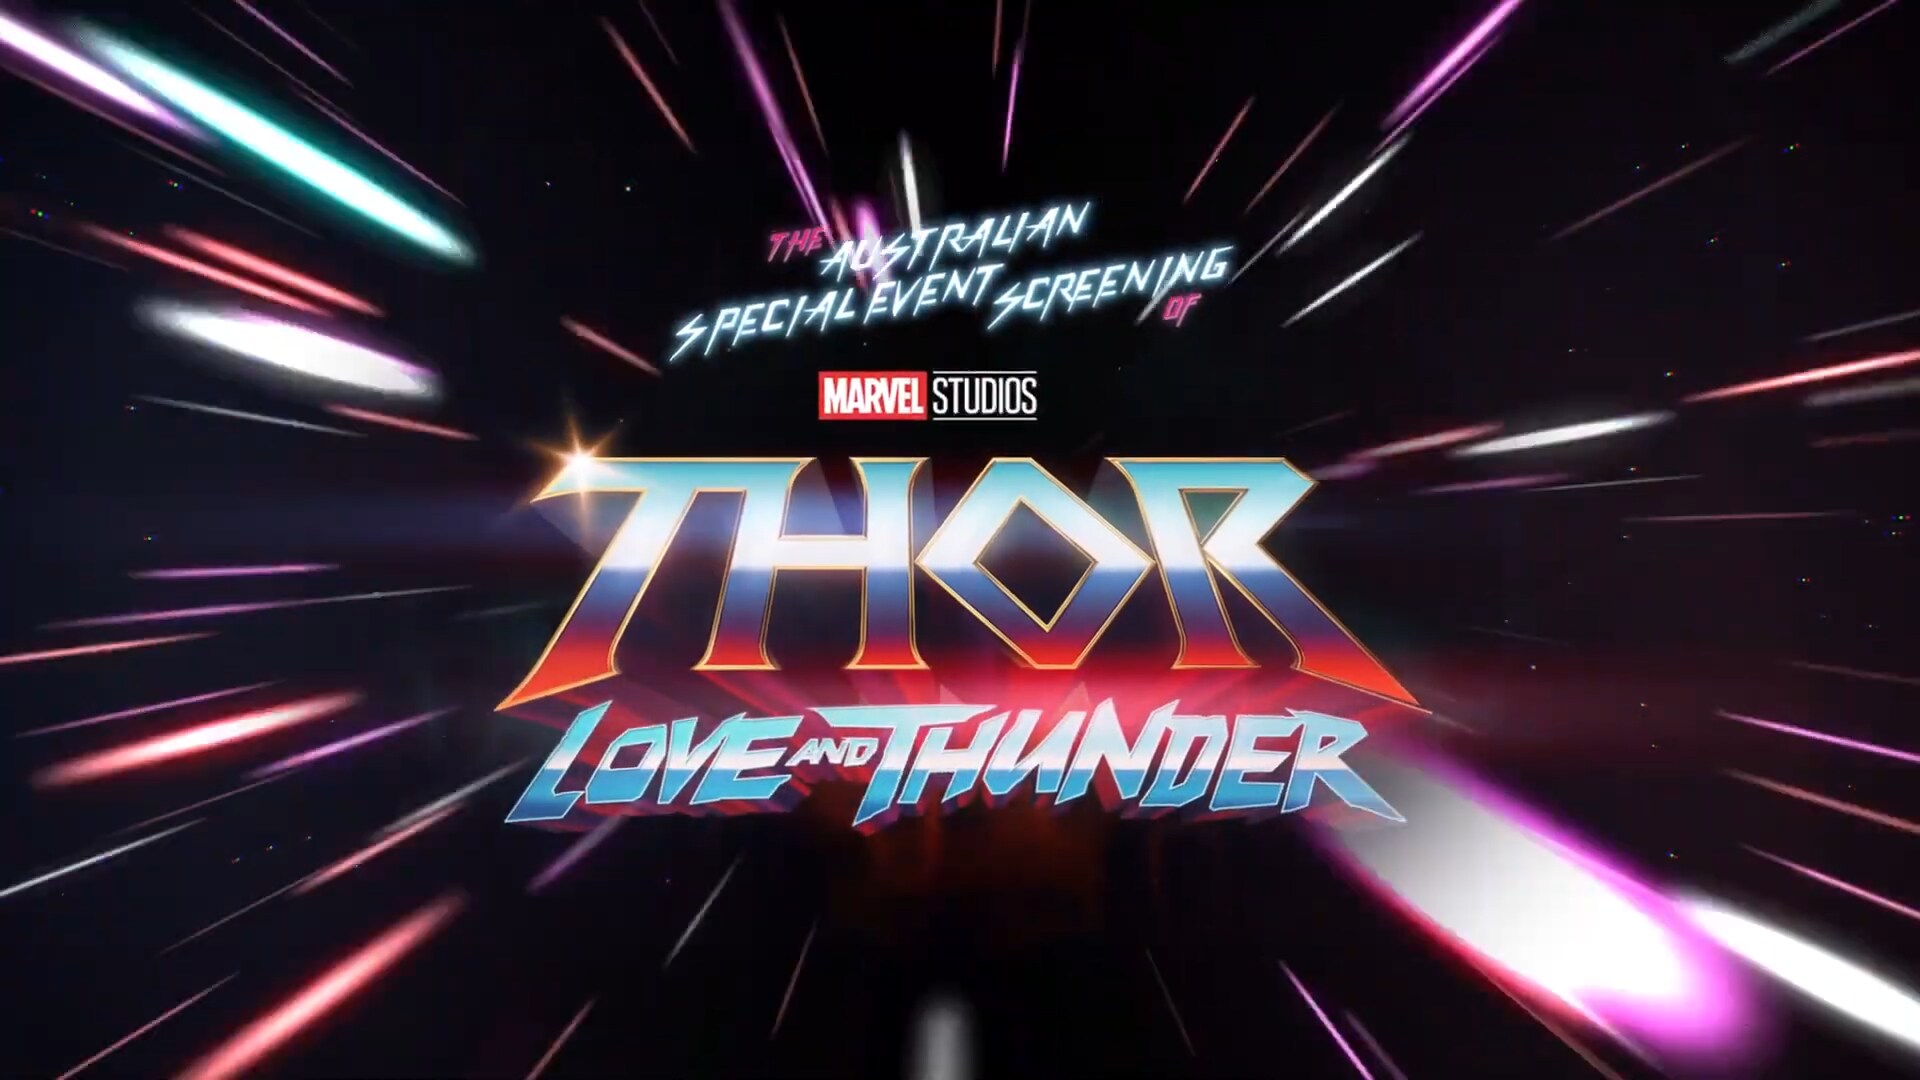 The Thor: Love and Thunder title treatment